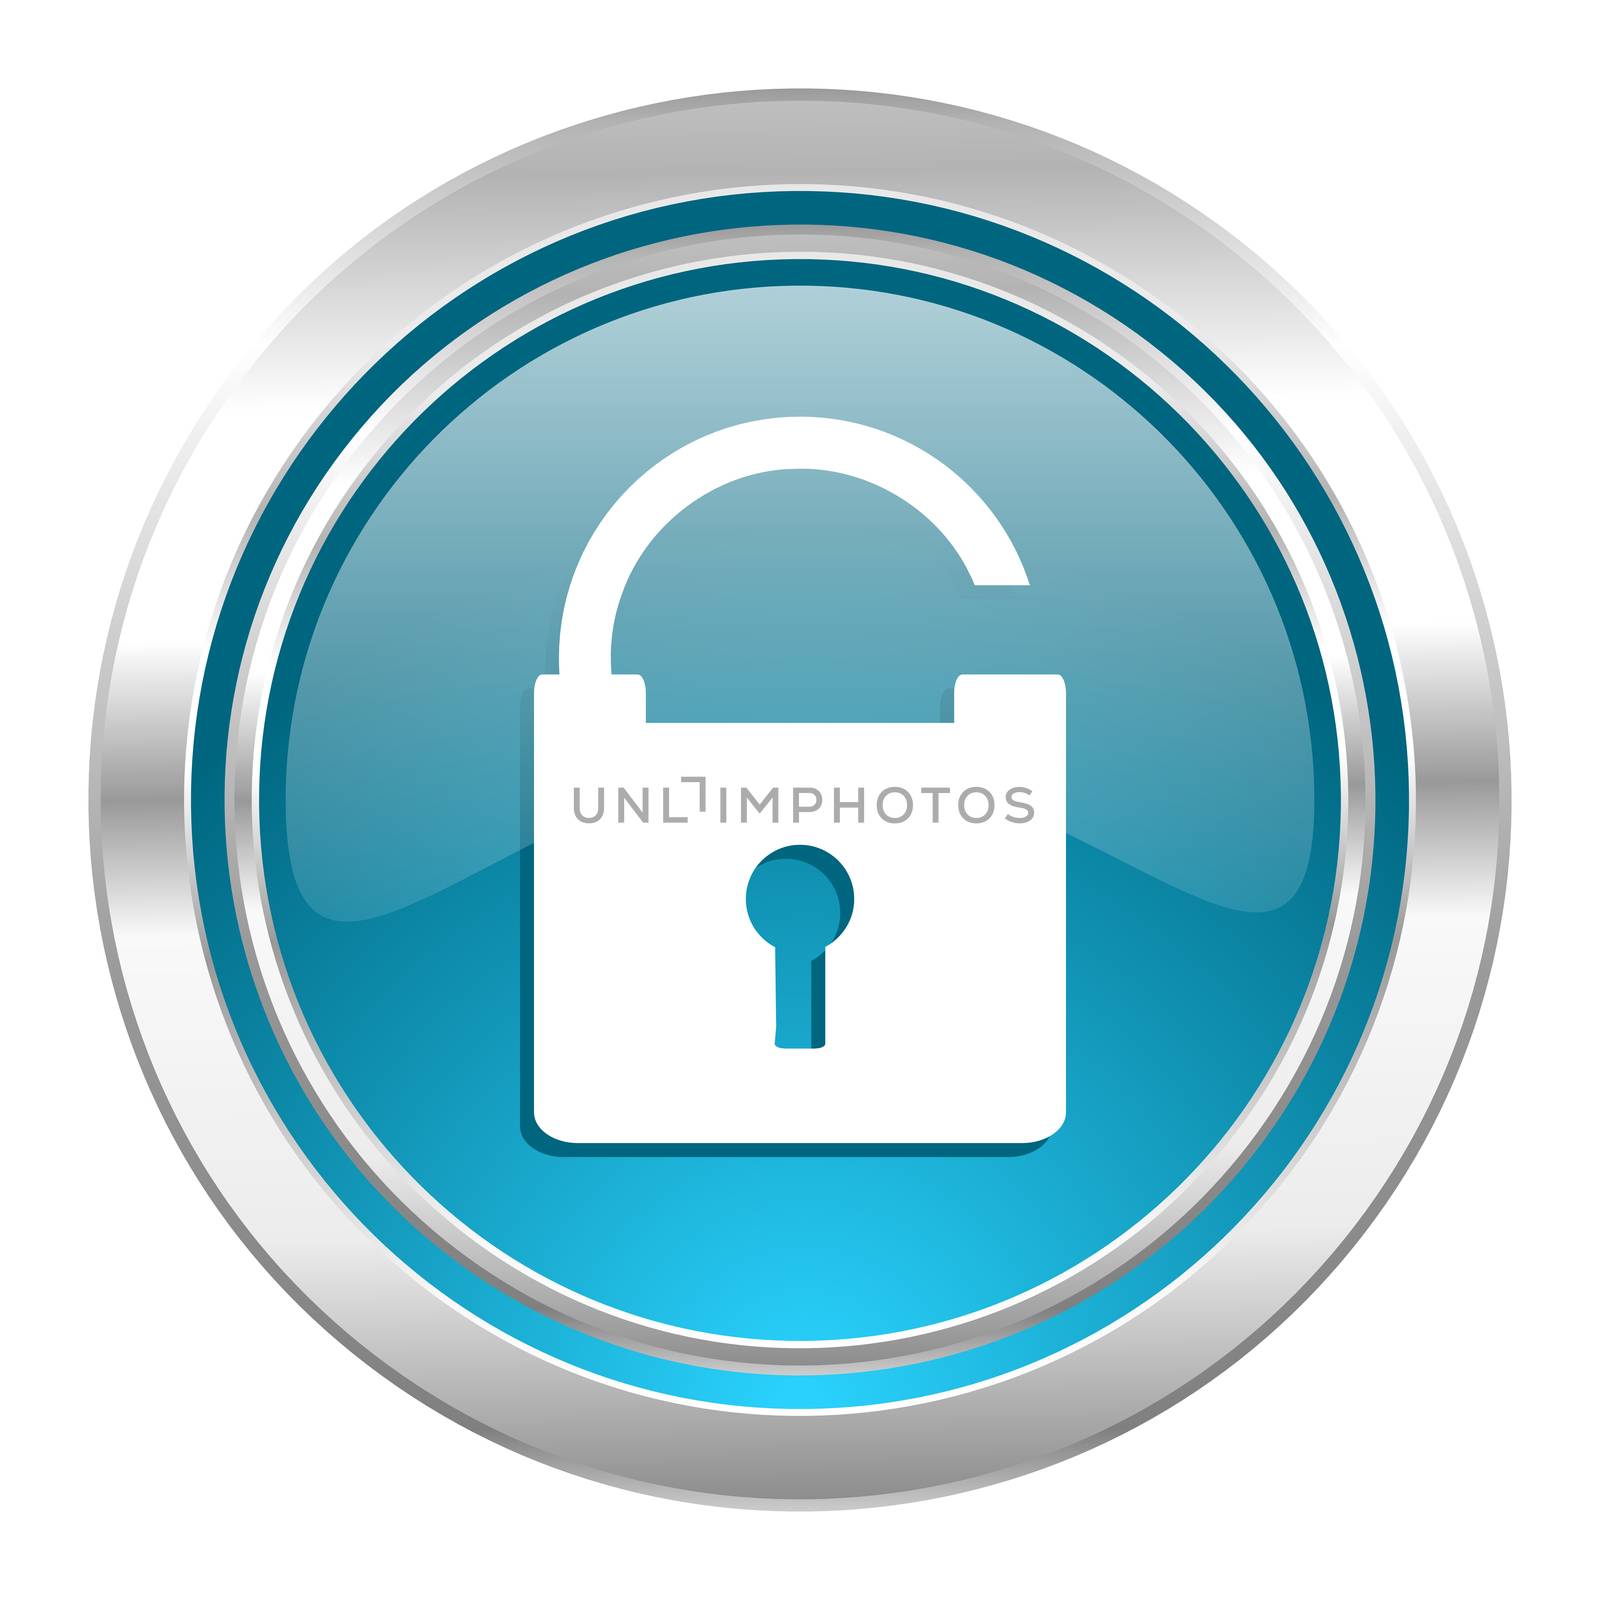 padlock icon, secure sign